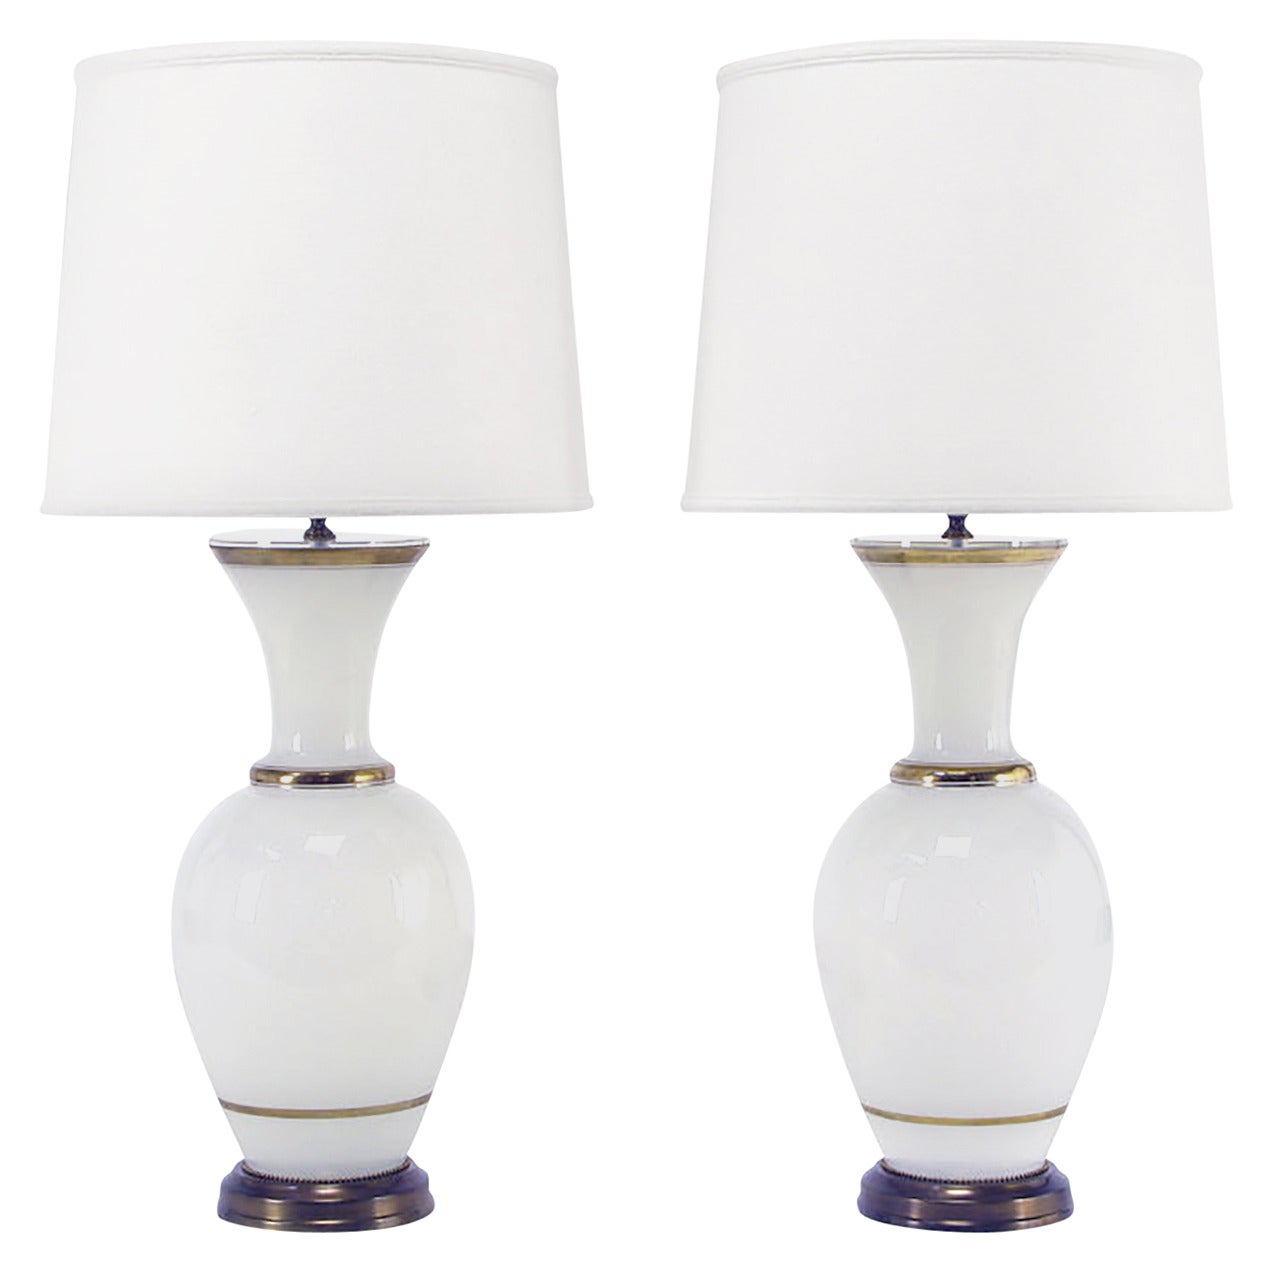 Pair of Frederick Cooper Gilt and White Milk Glass Table Lamps